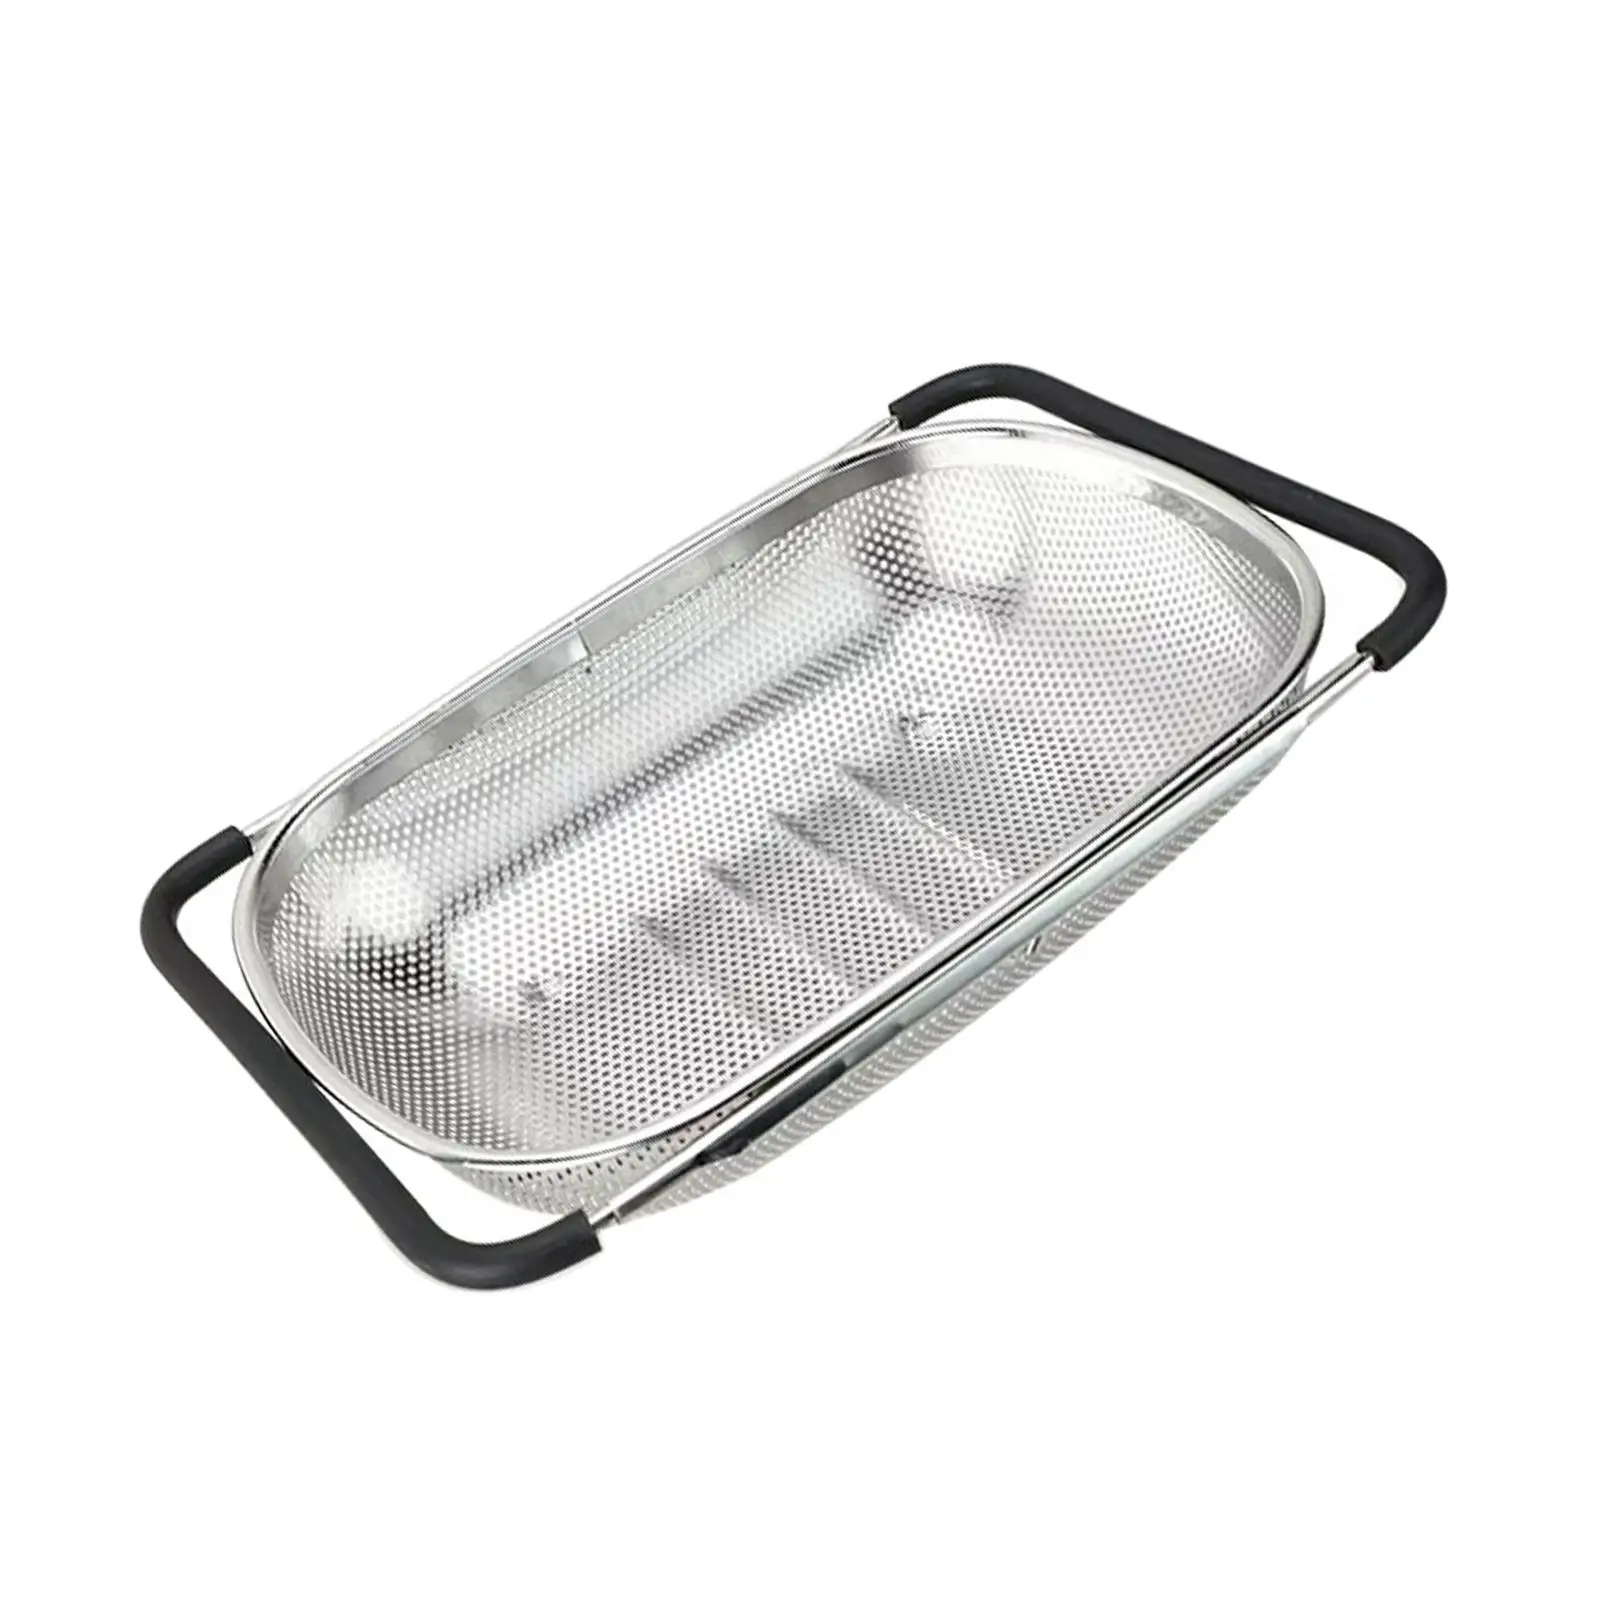 Expandable Stainless Steel Colander/strainer Oval for Food Preparation Safety Silicone Handle over The Sink Stainless Steel